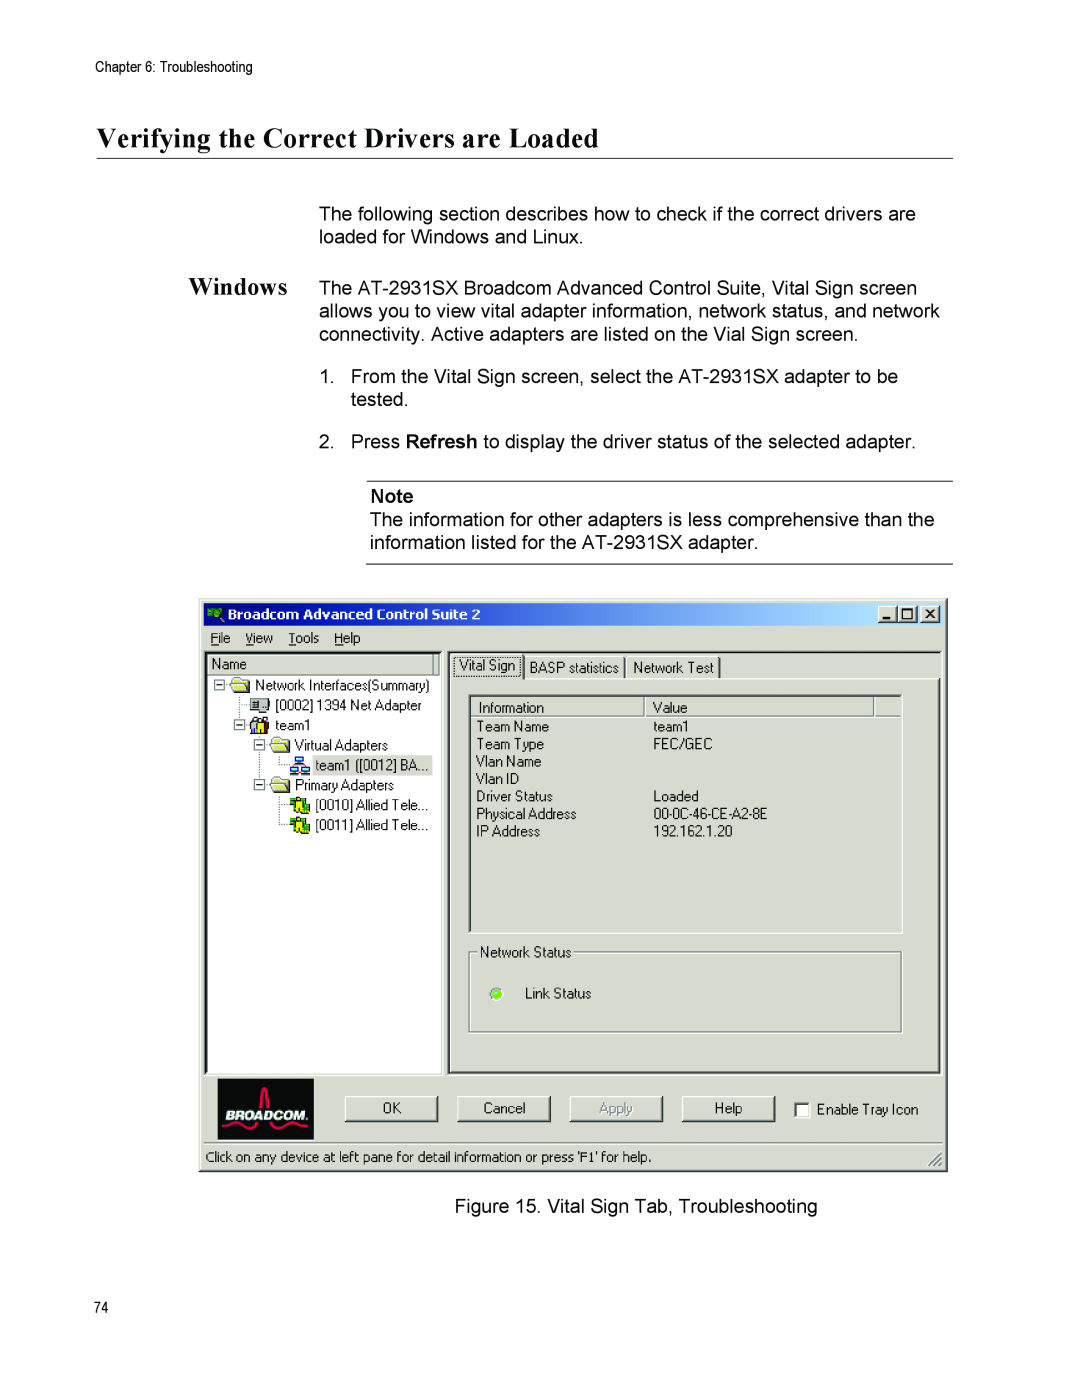 Allied Telesis AT-2931SX manual Verifying the Correct Drivers are Loaded 